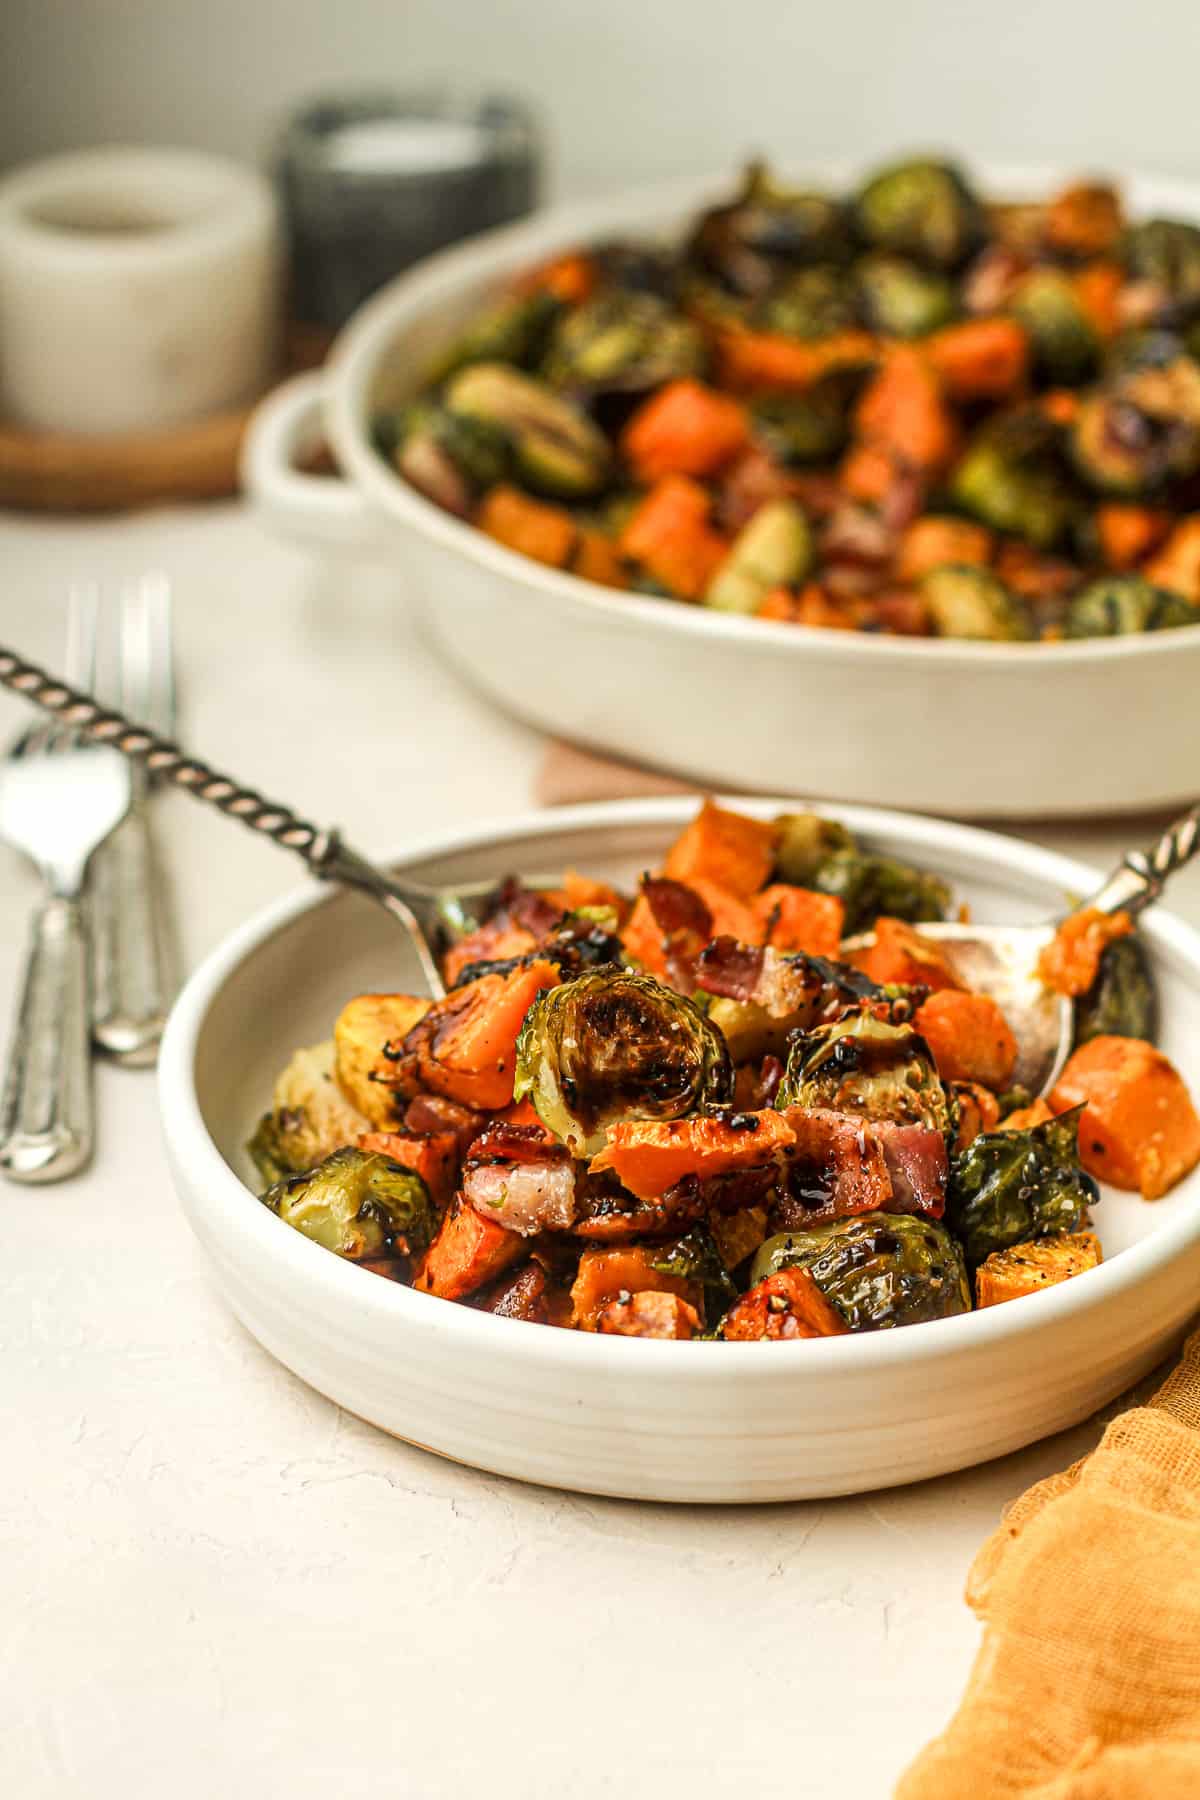 Side view of a plate of brussels sprouts and sweet potatoes.